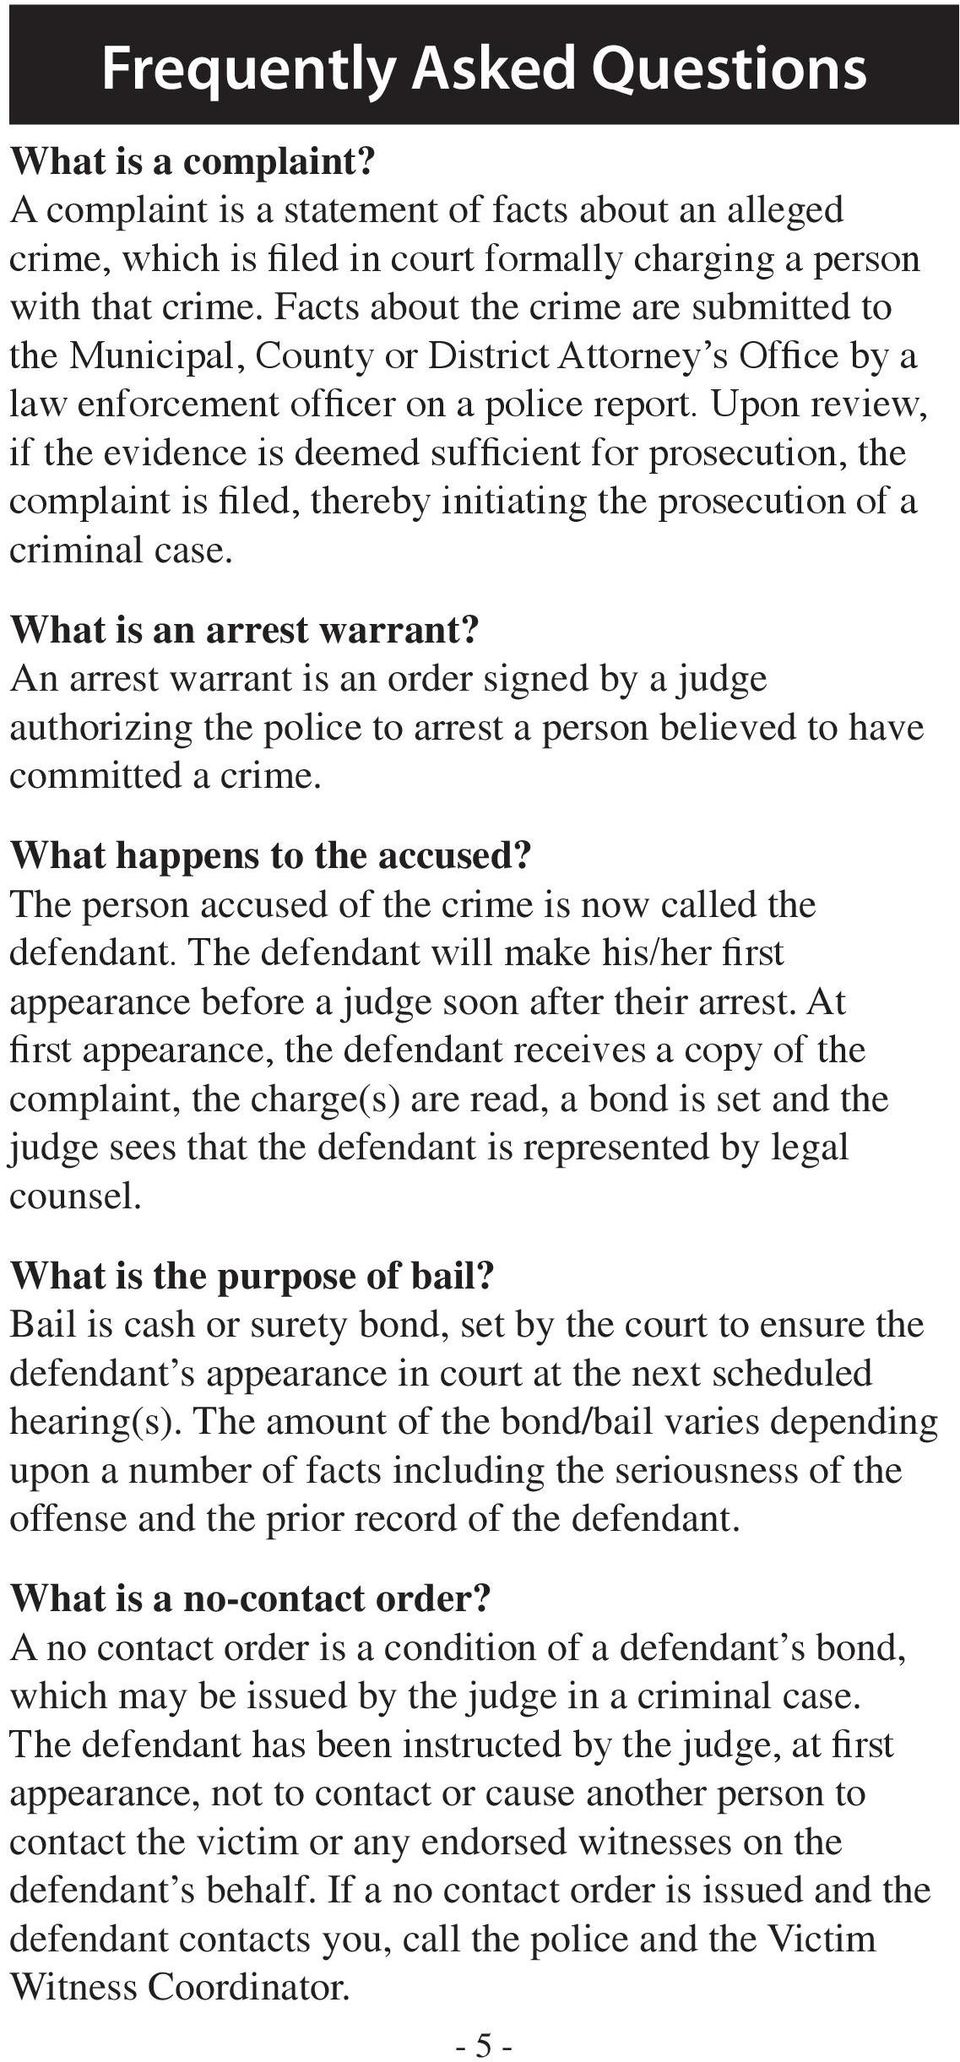 Upon review, if the evidence is deemed sufficient for prosecution, the complaint is filed, thereby initiating the prosecution of a criminal case. What is an arrest warrant?